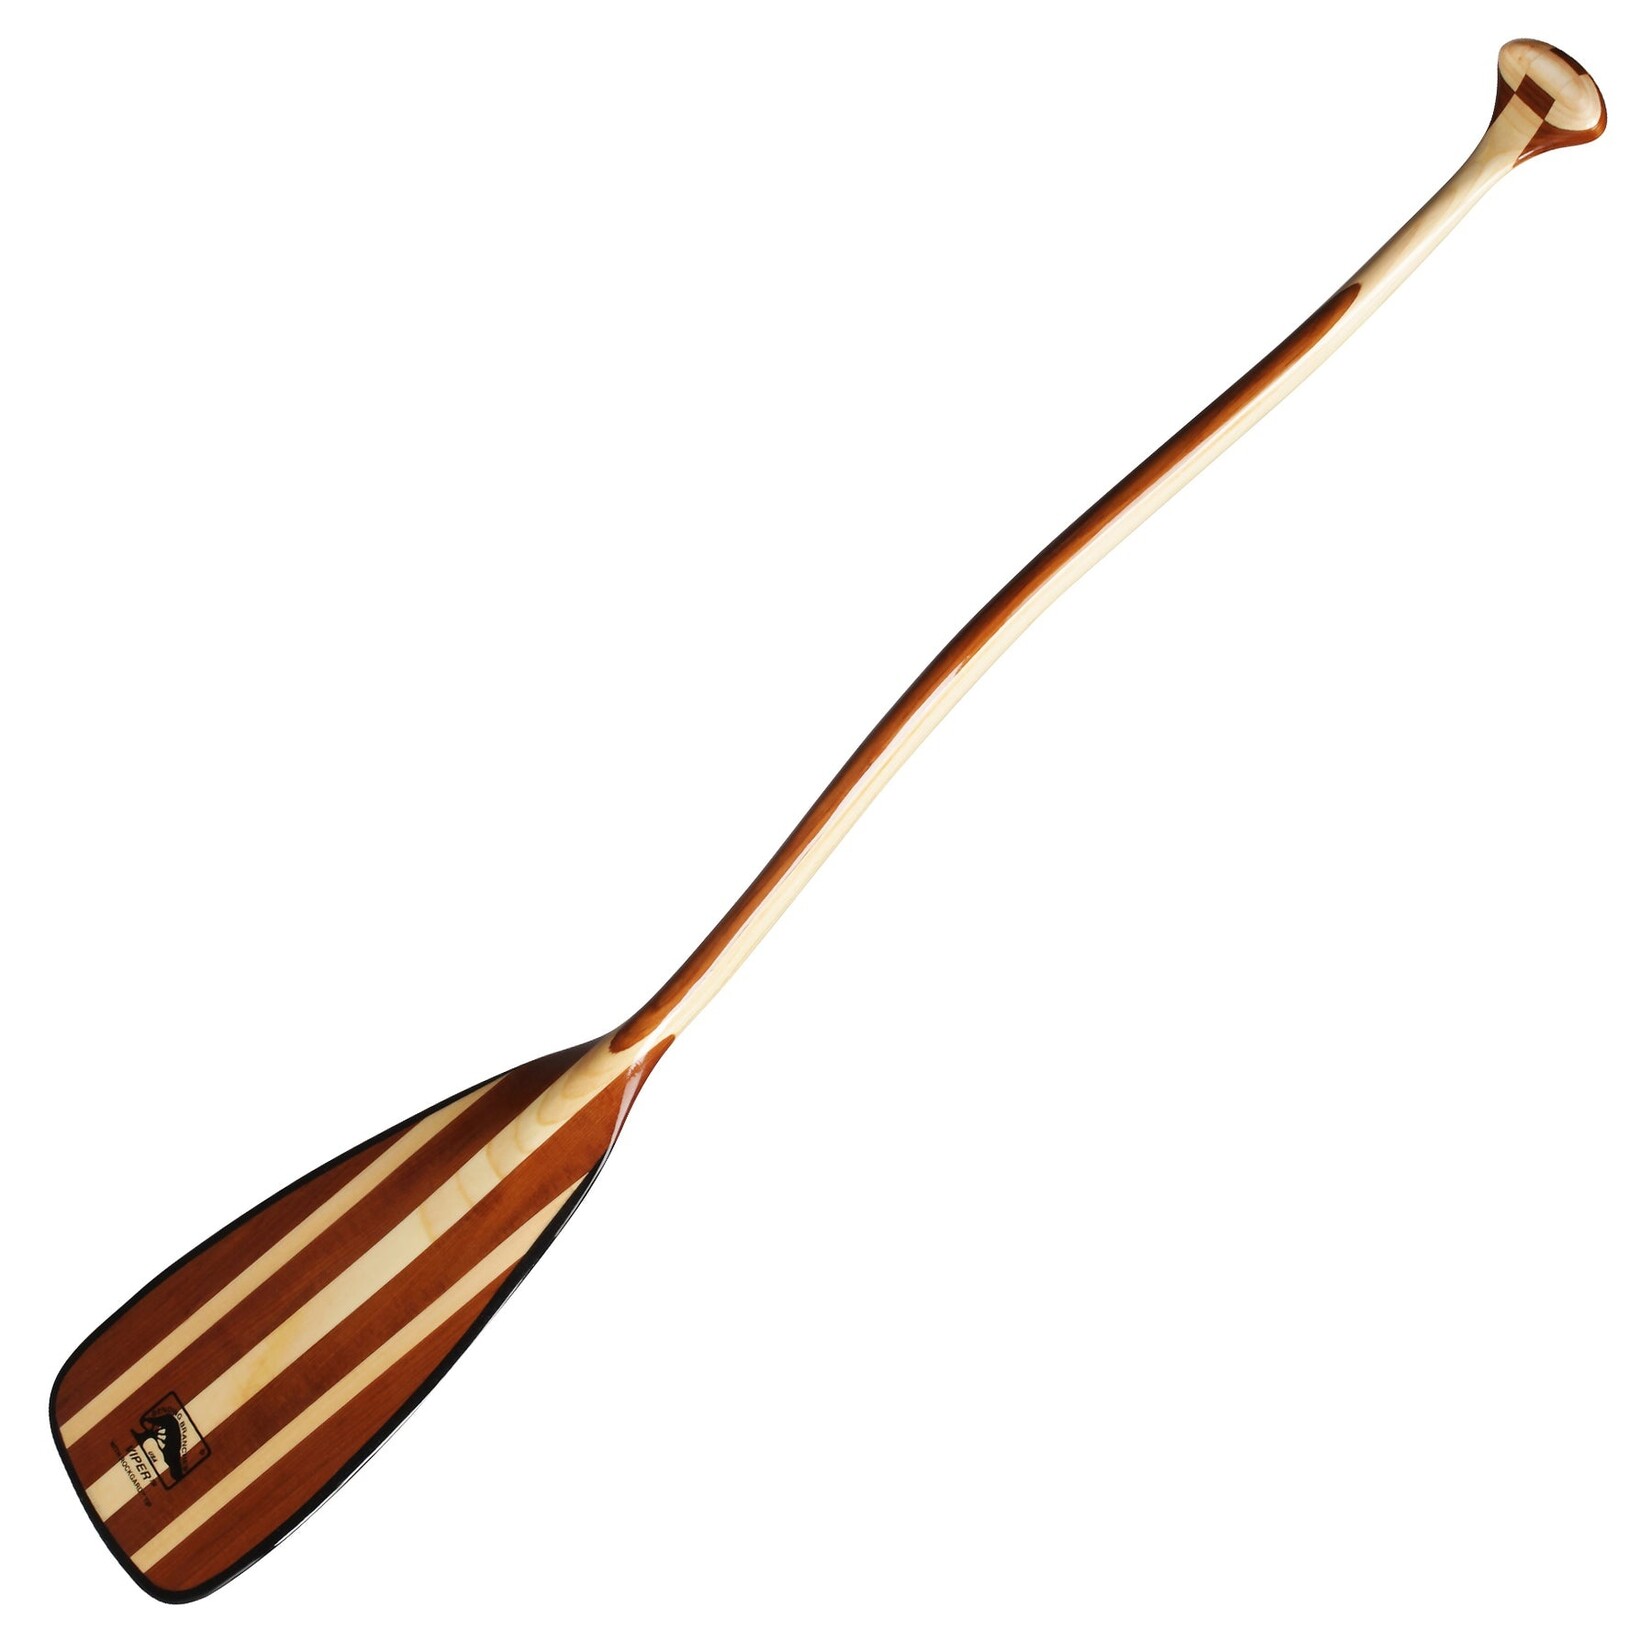 Bending Branches Viper Double Bend Canoe Paddle